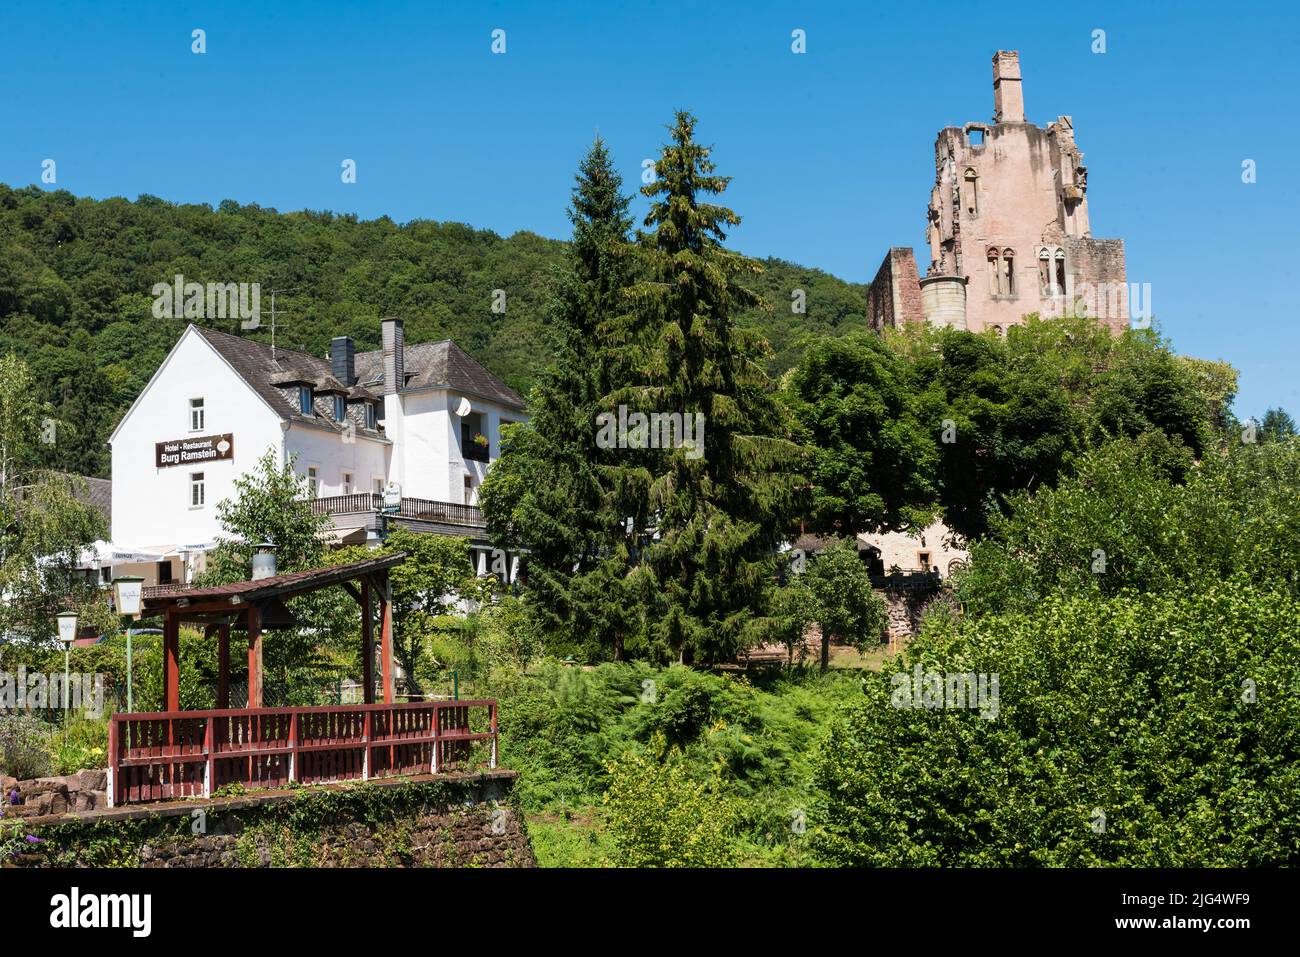 Kordel, Rhineland-Palatinate - Germany - 07 26 2020 The Ramstein Castle , restaurant and hills Stock Photo